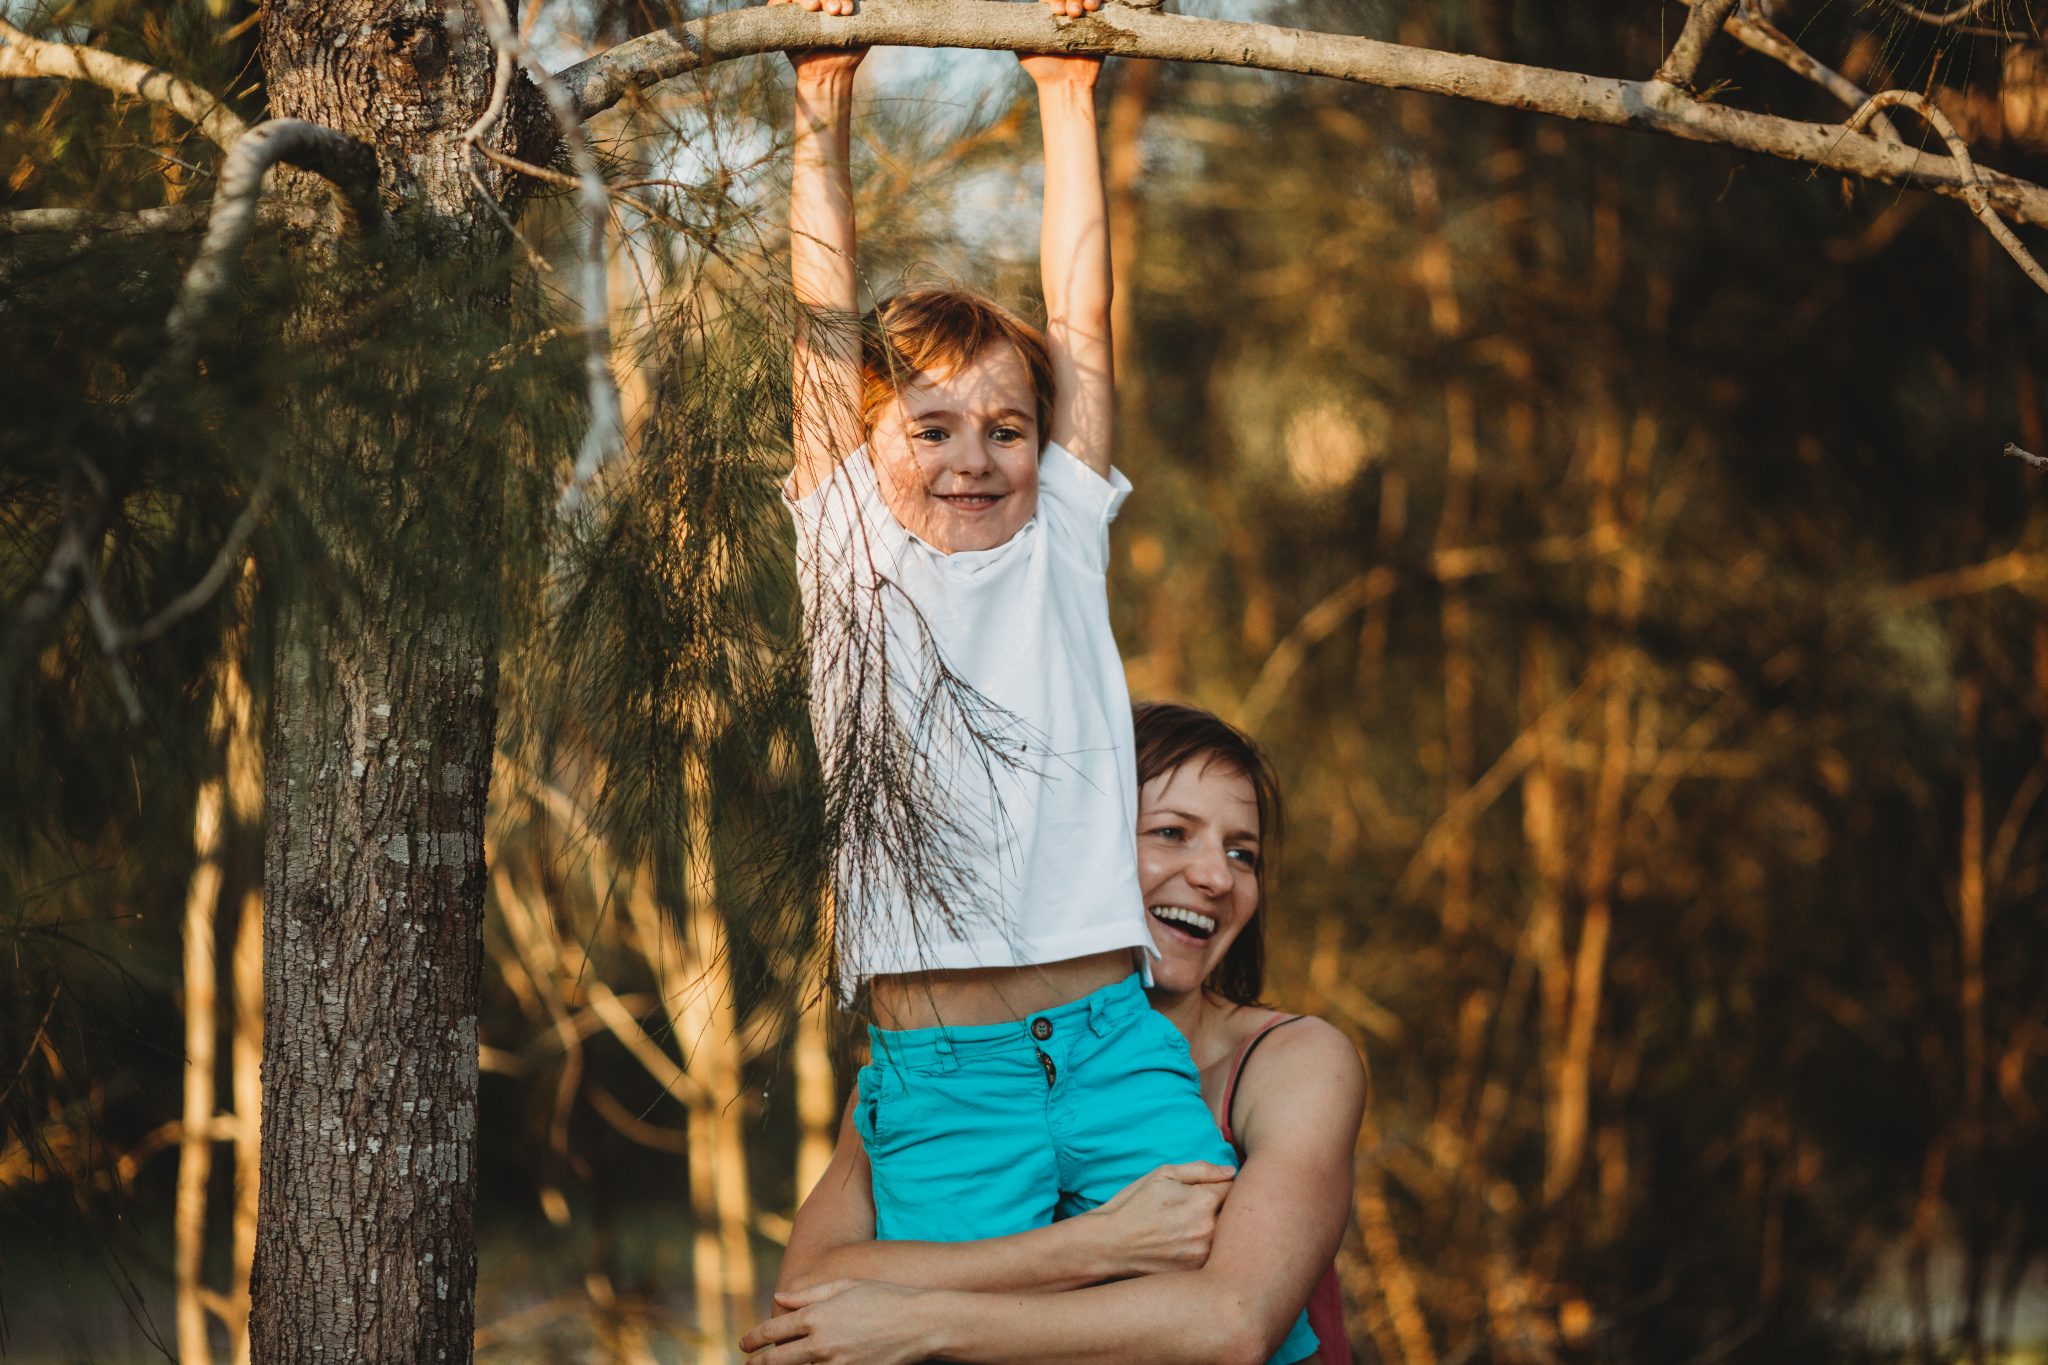 Young boy smiling, while hanging from branch as his mother supports him